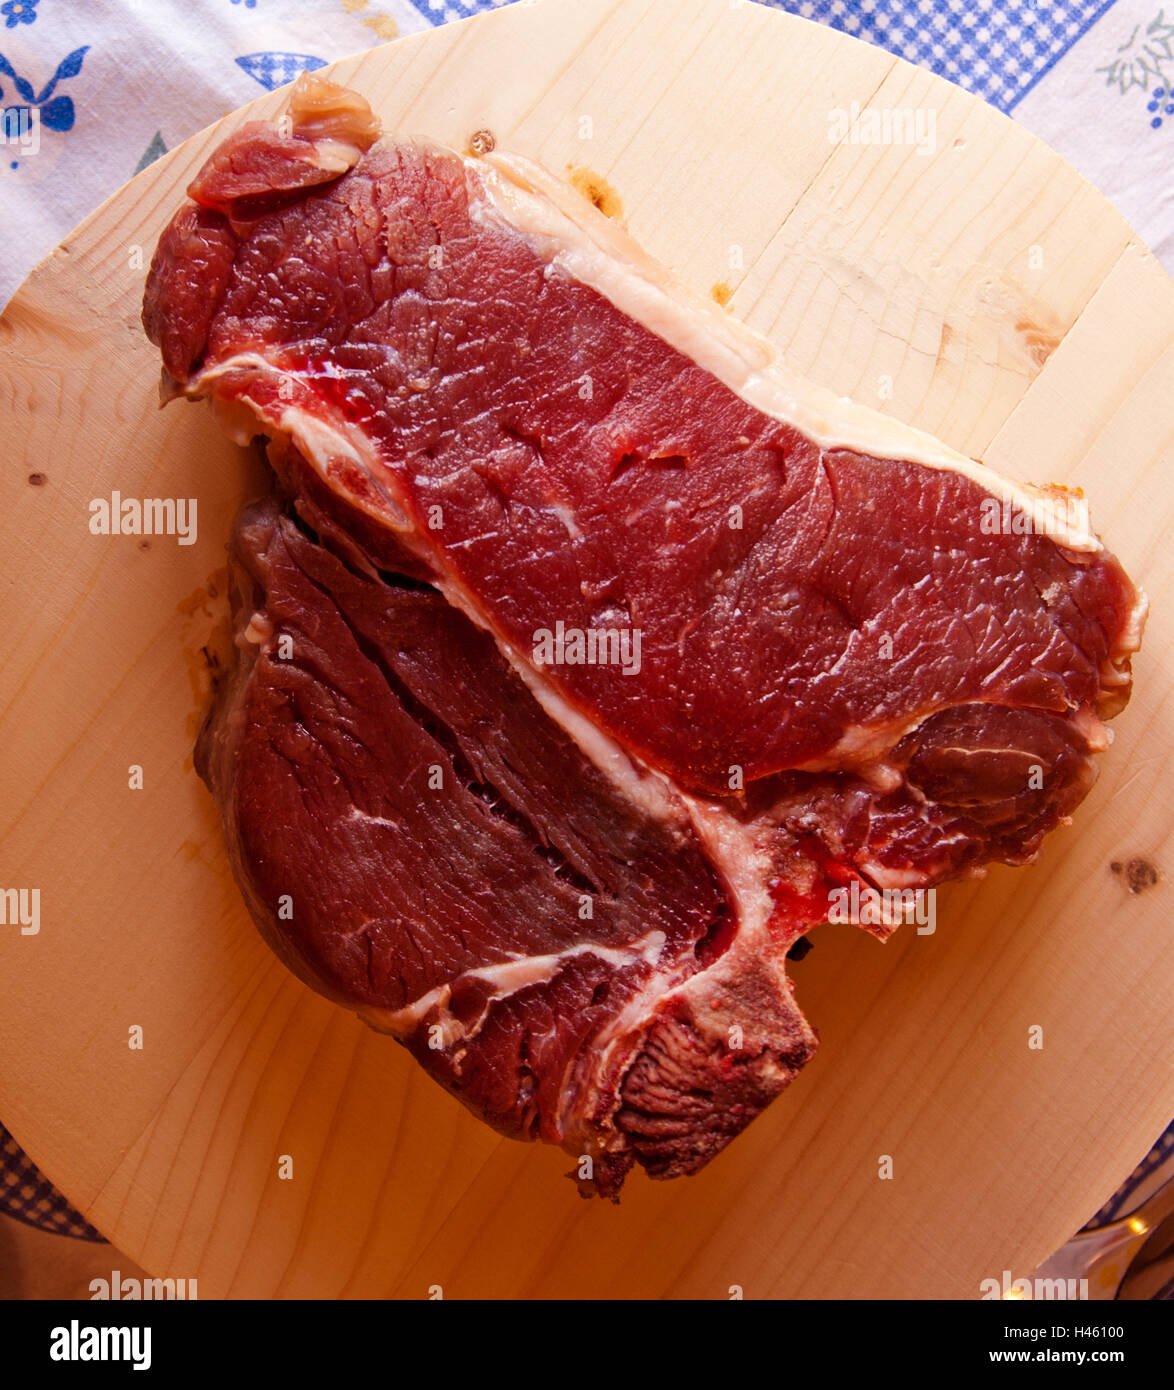 the flesh of the most prized beef, t bone steack called in Italian  Fiorentina steak, ready to be cooked Stock Photo - Alamy